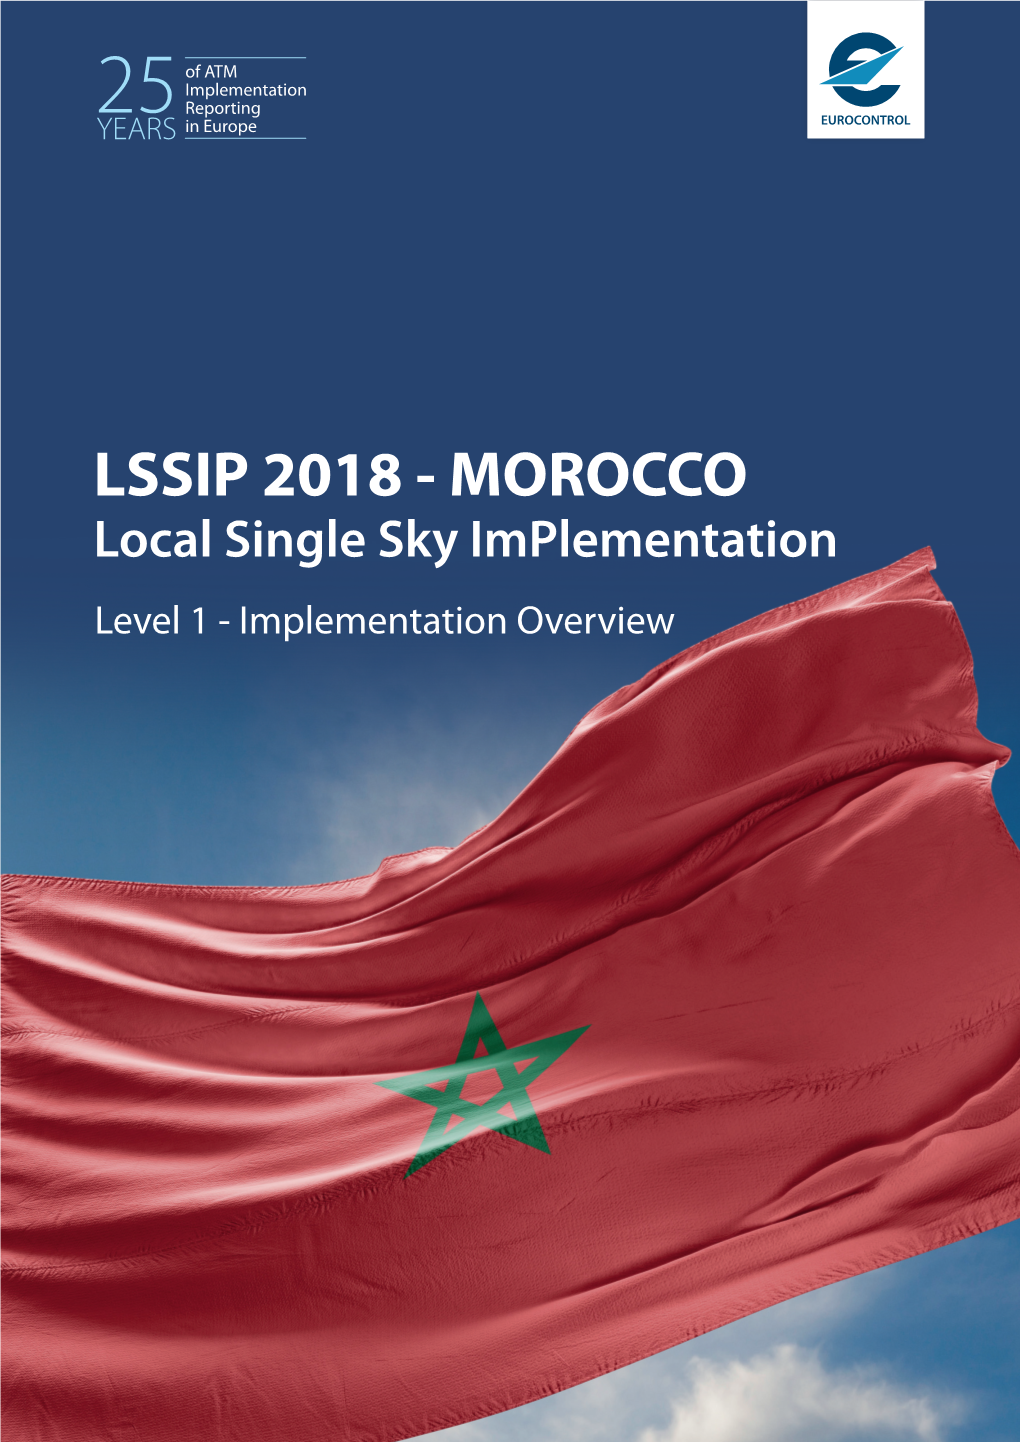 MOROCCO Local Single Sky Implementation Level 1 - Implementation Overview